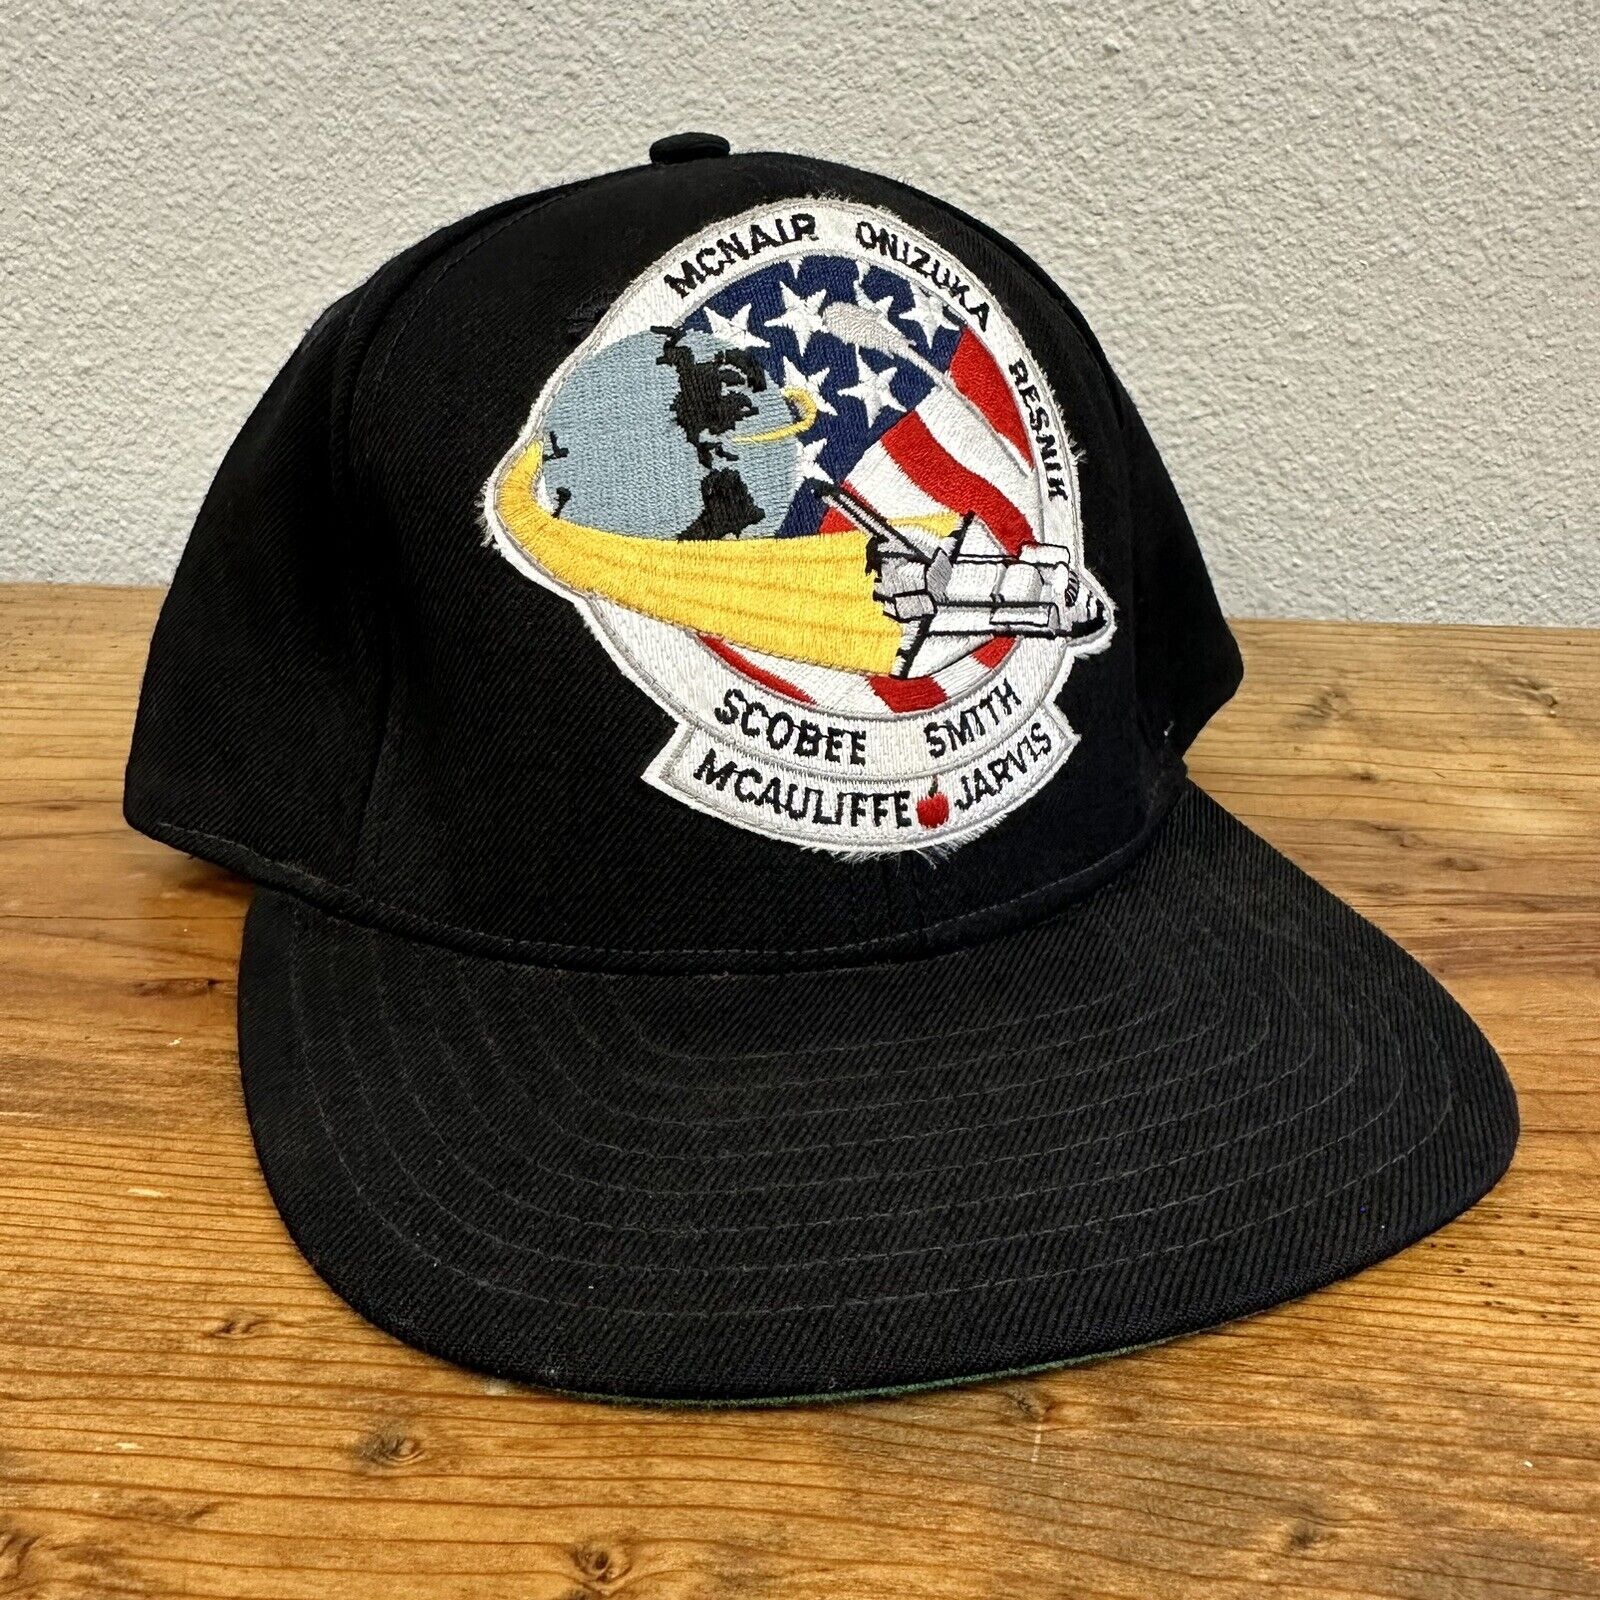 Vtg 1986 Hat Cap Shuttle Challenger STS-51-L Embroidered Patch McAuliffe McNair